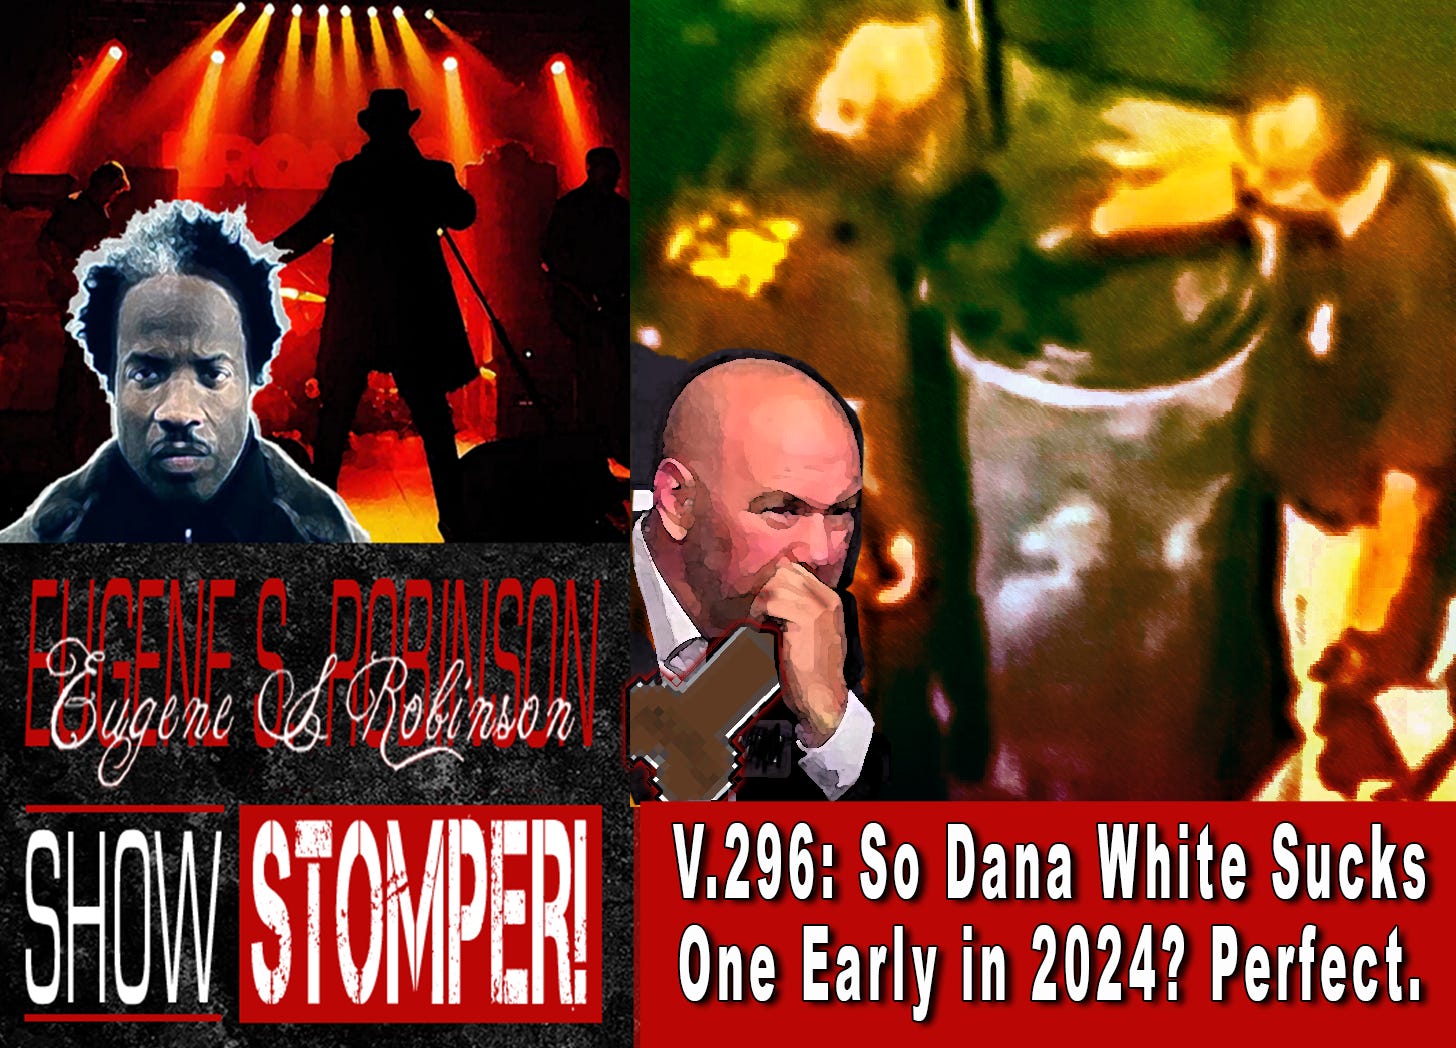 V.296: So Dana White Sucks One Early in 2024? Perfect. All On The Eugene S. Robinson Show Stomper!